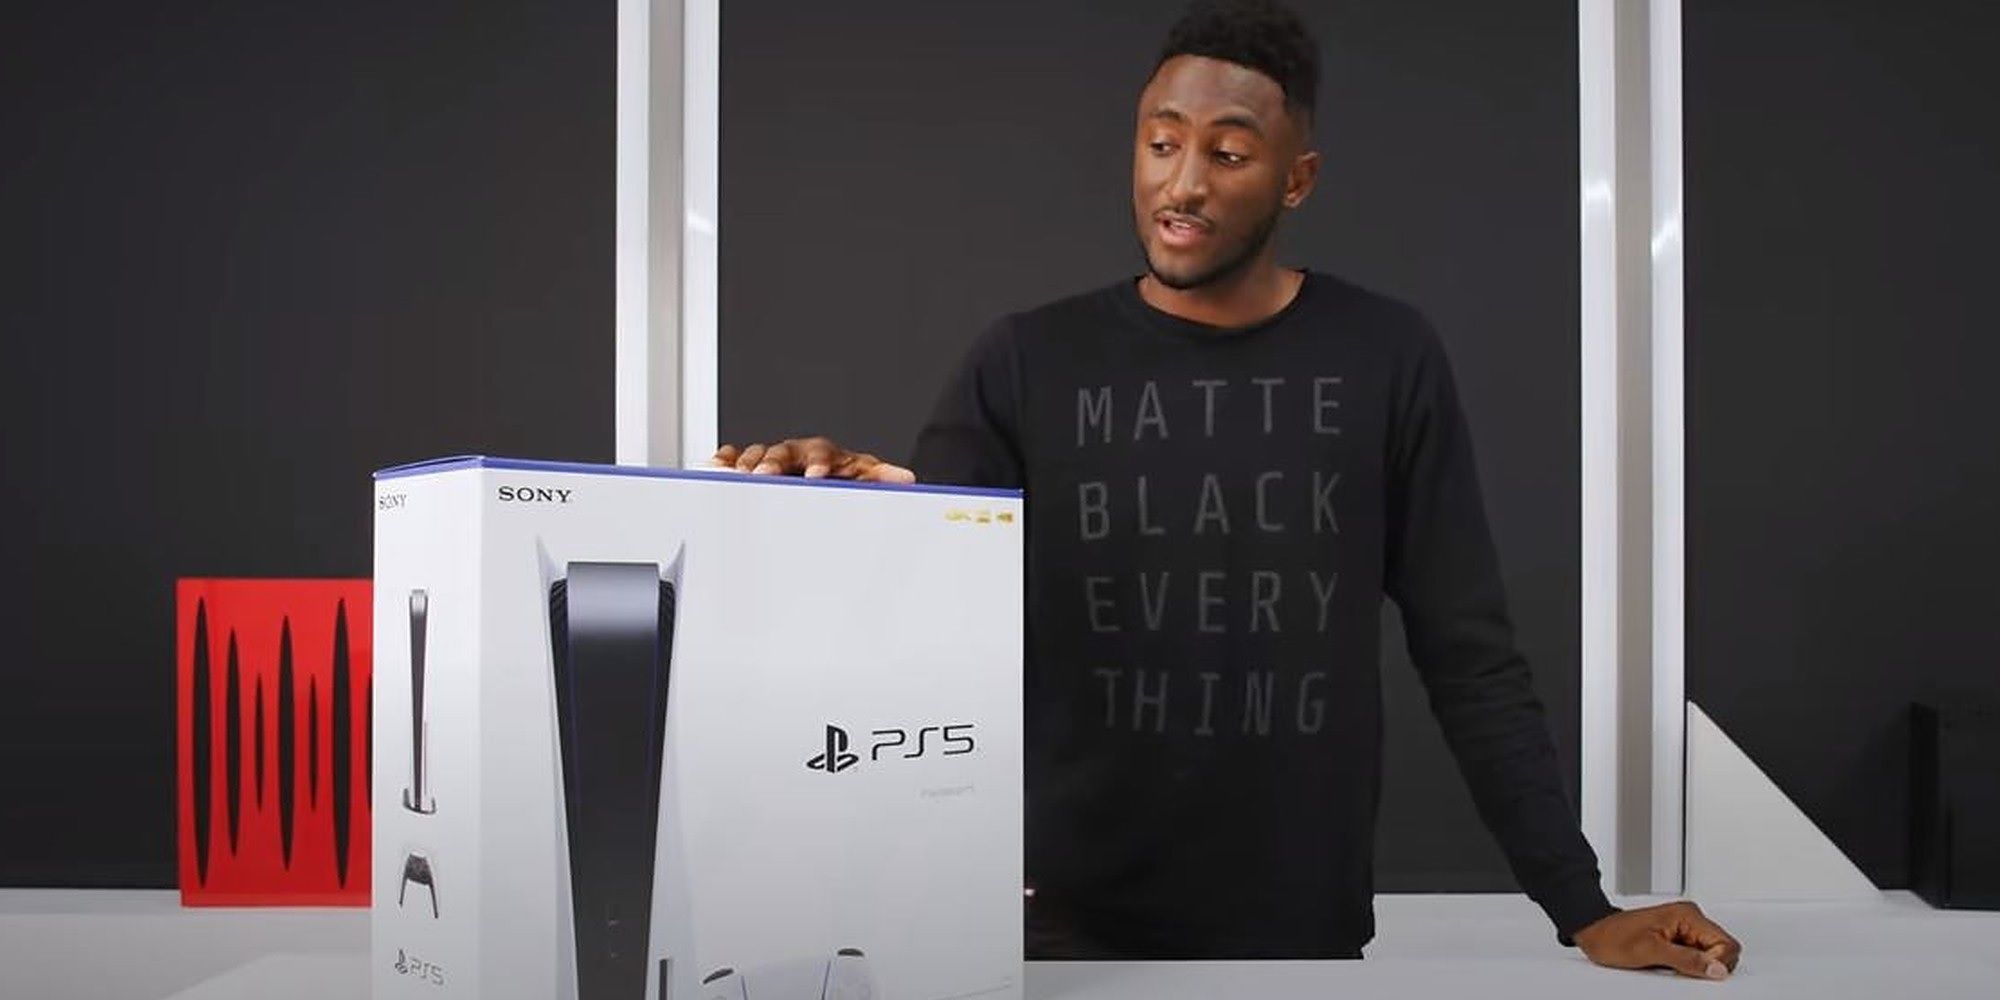 Marques Brownlee's unboxing video of the PlayStation 5.